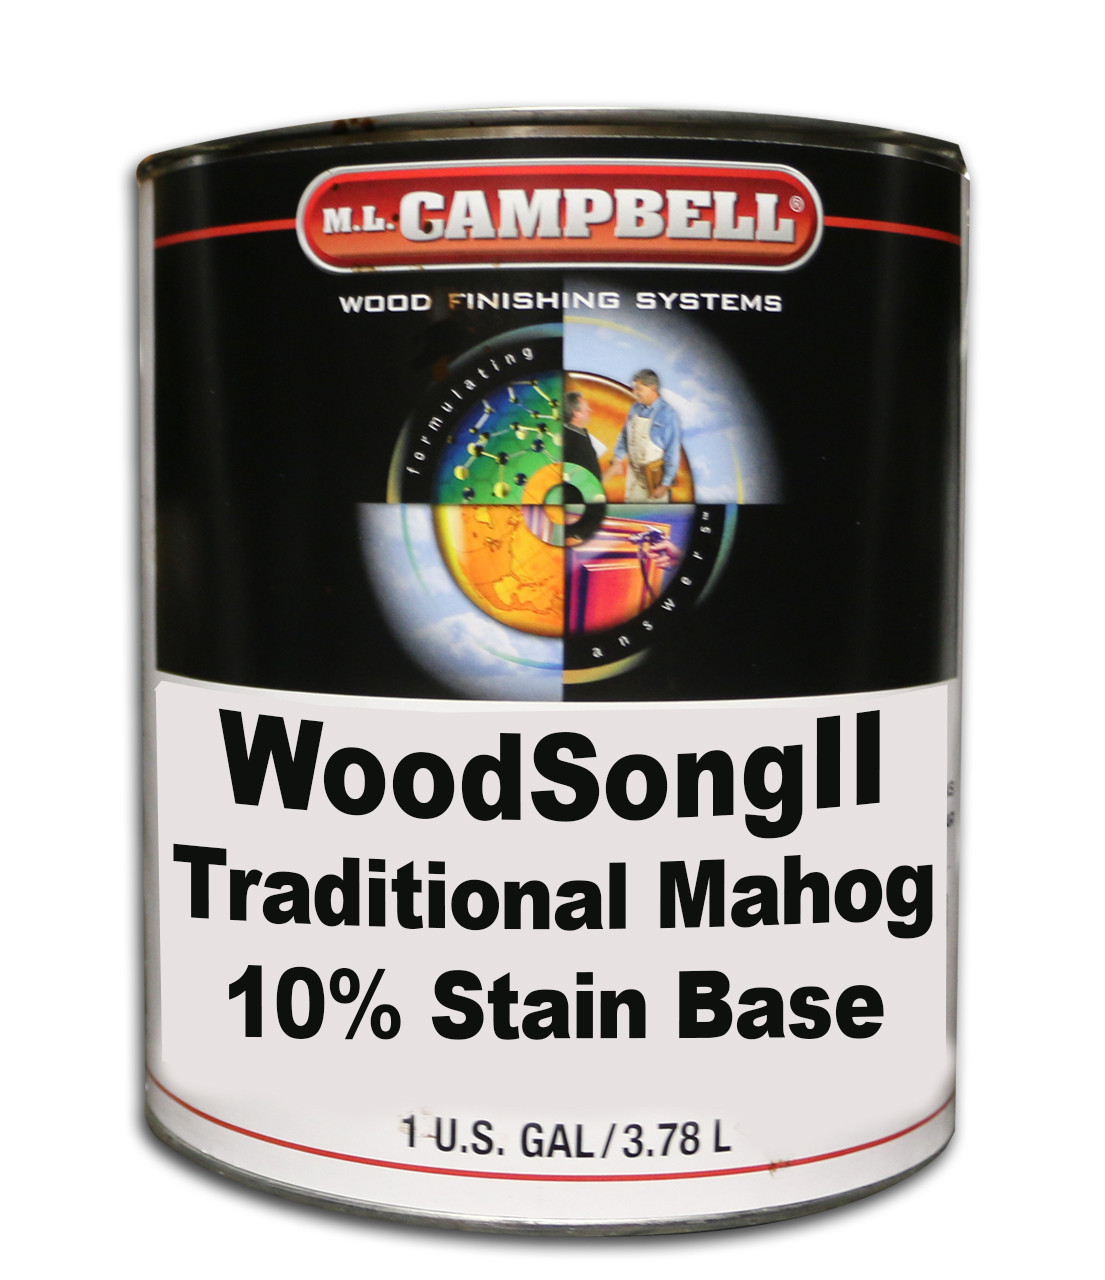 ML Campbell Traditional Mahog Woodsong II 10% Stain